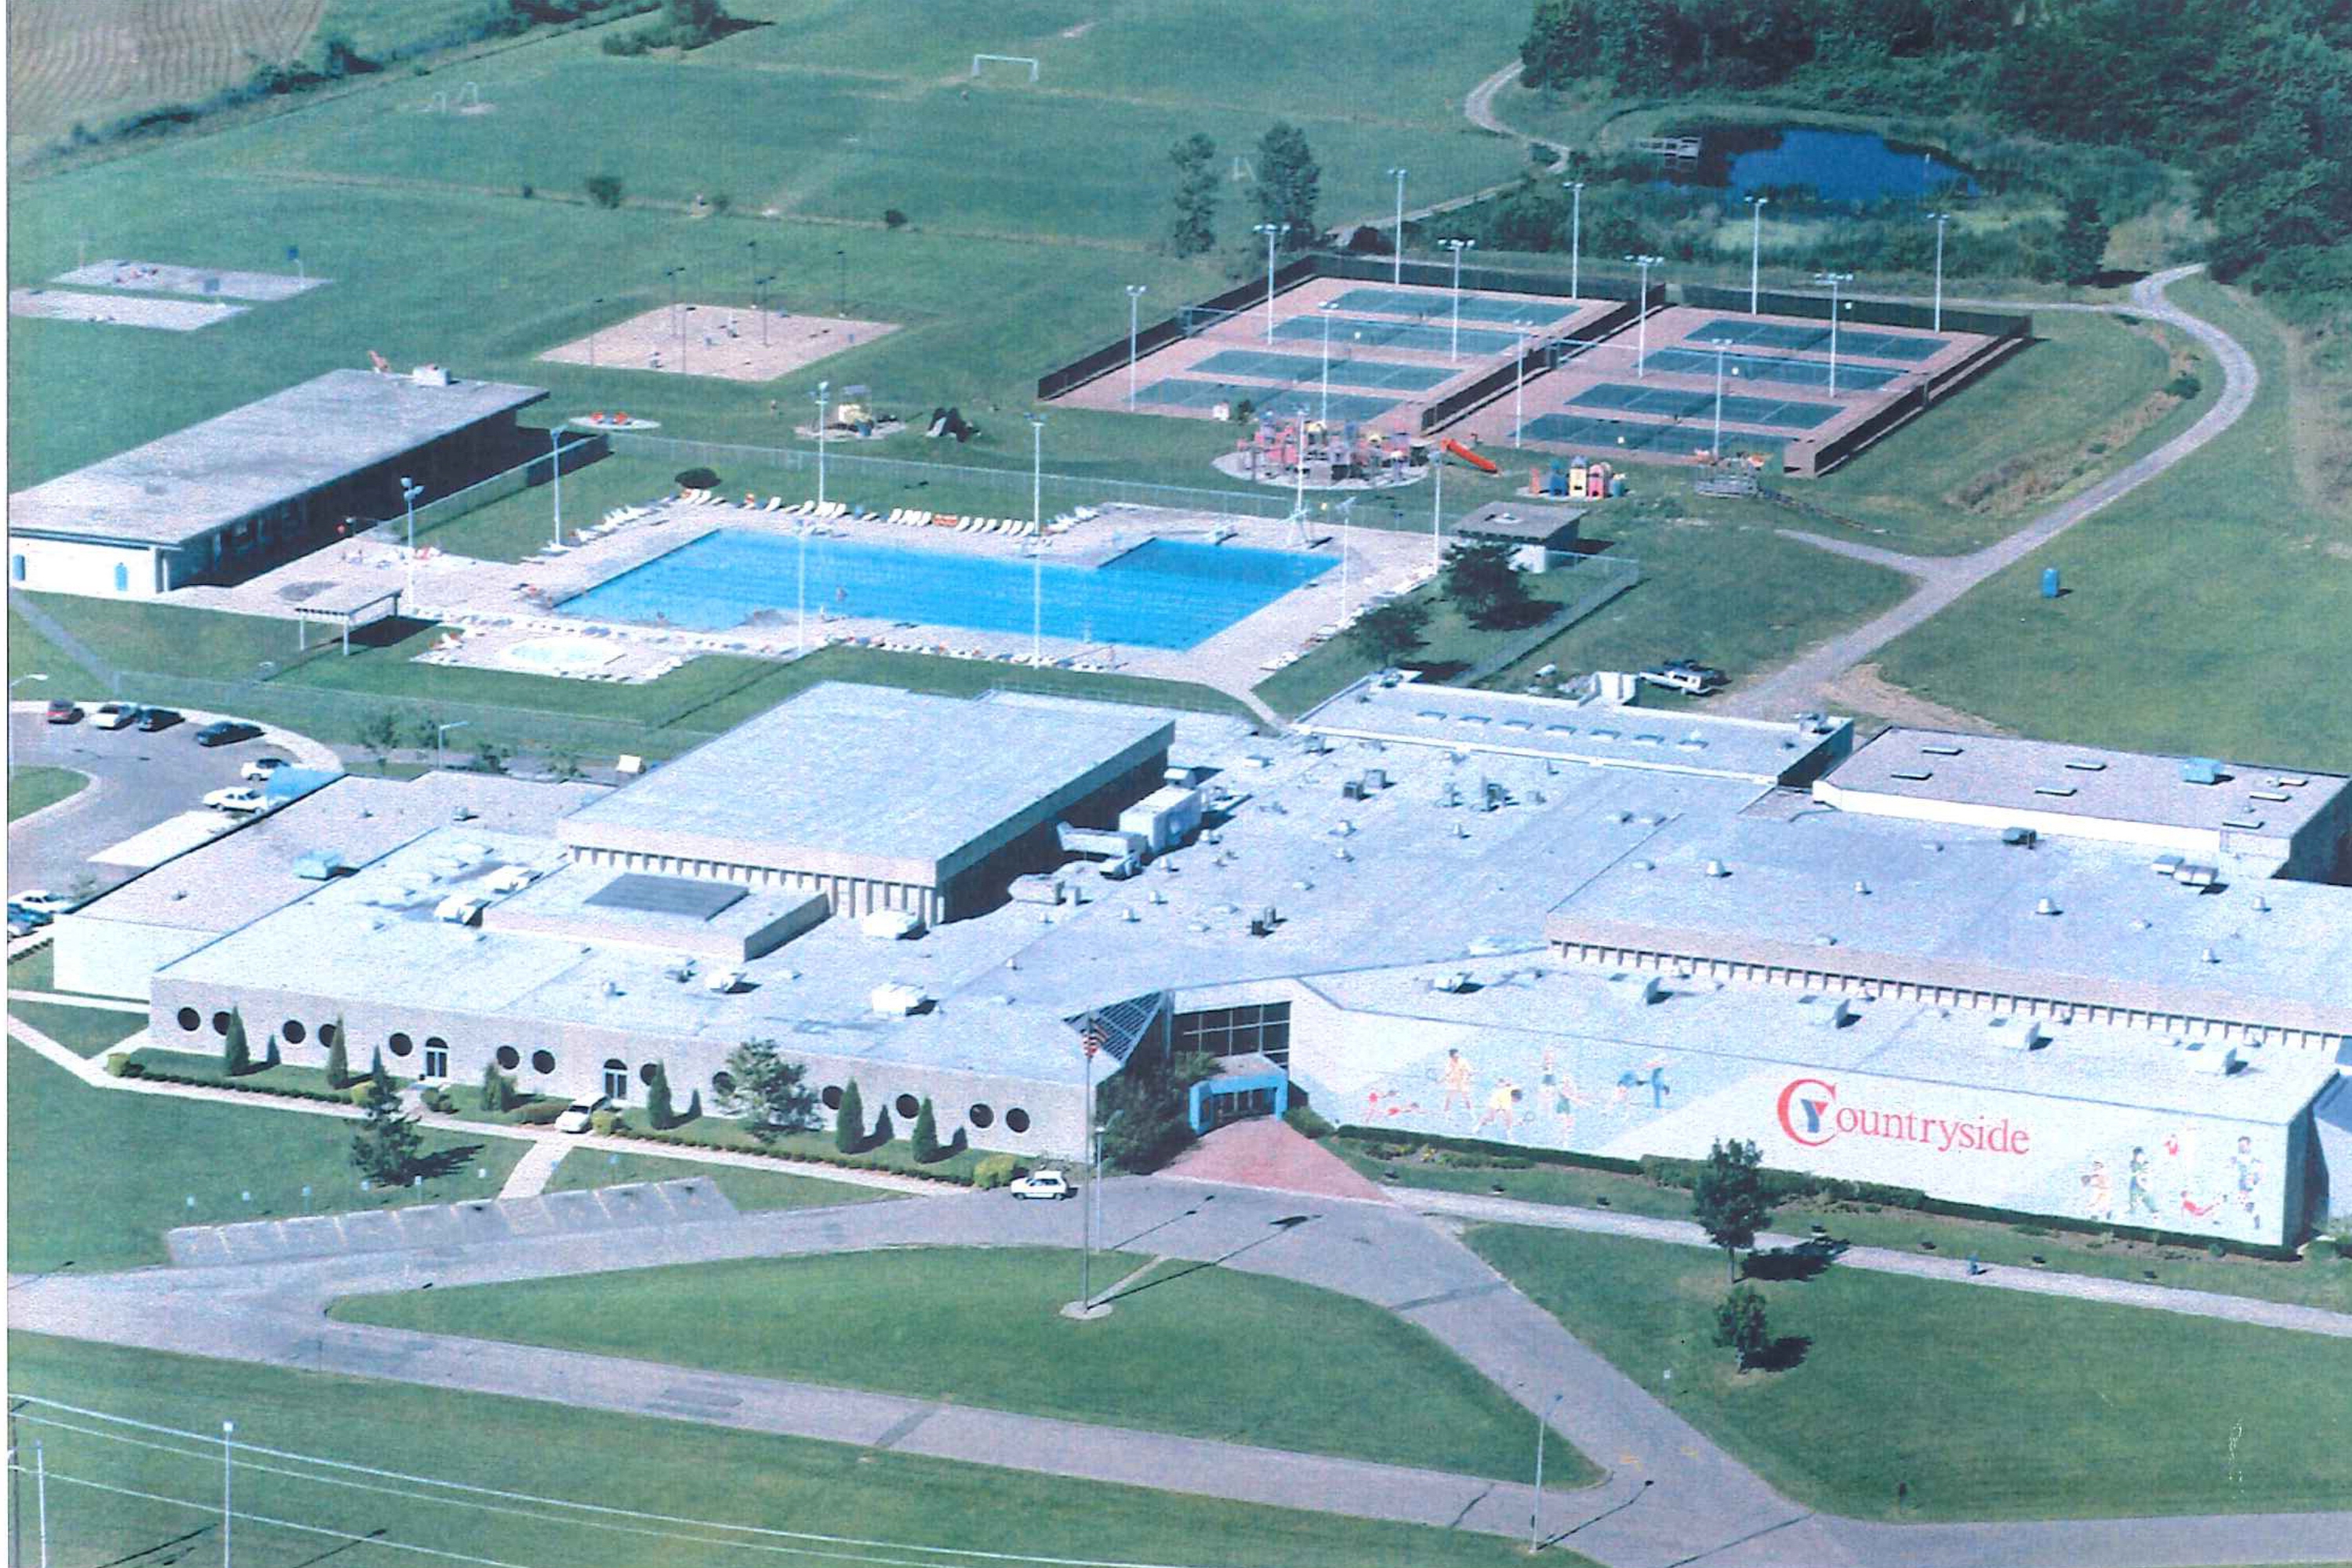 an old picture of the Countryside YMCA building from aerial view.